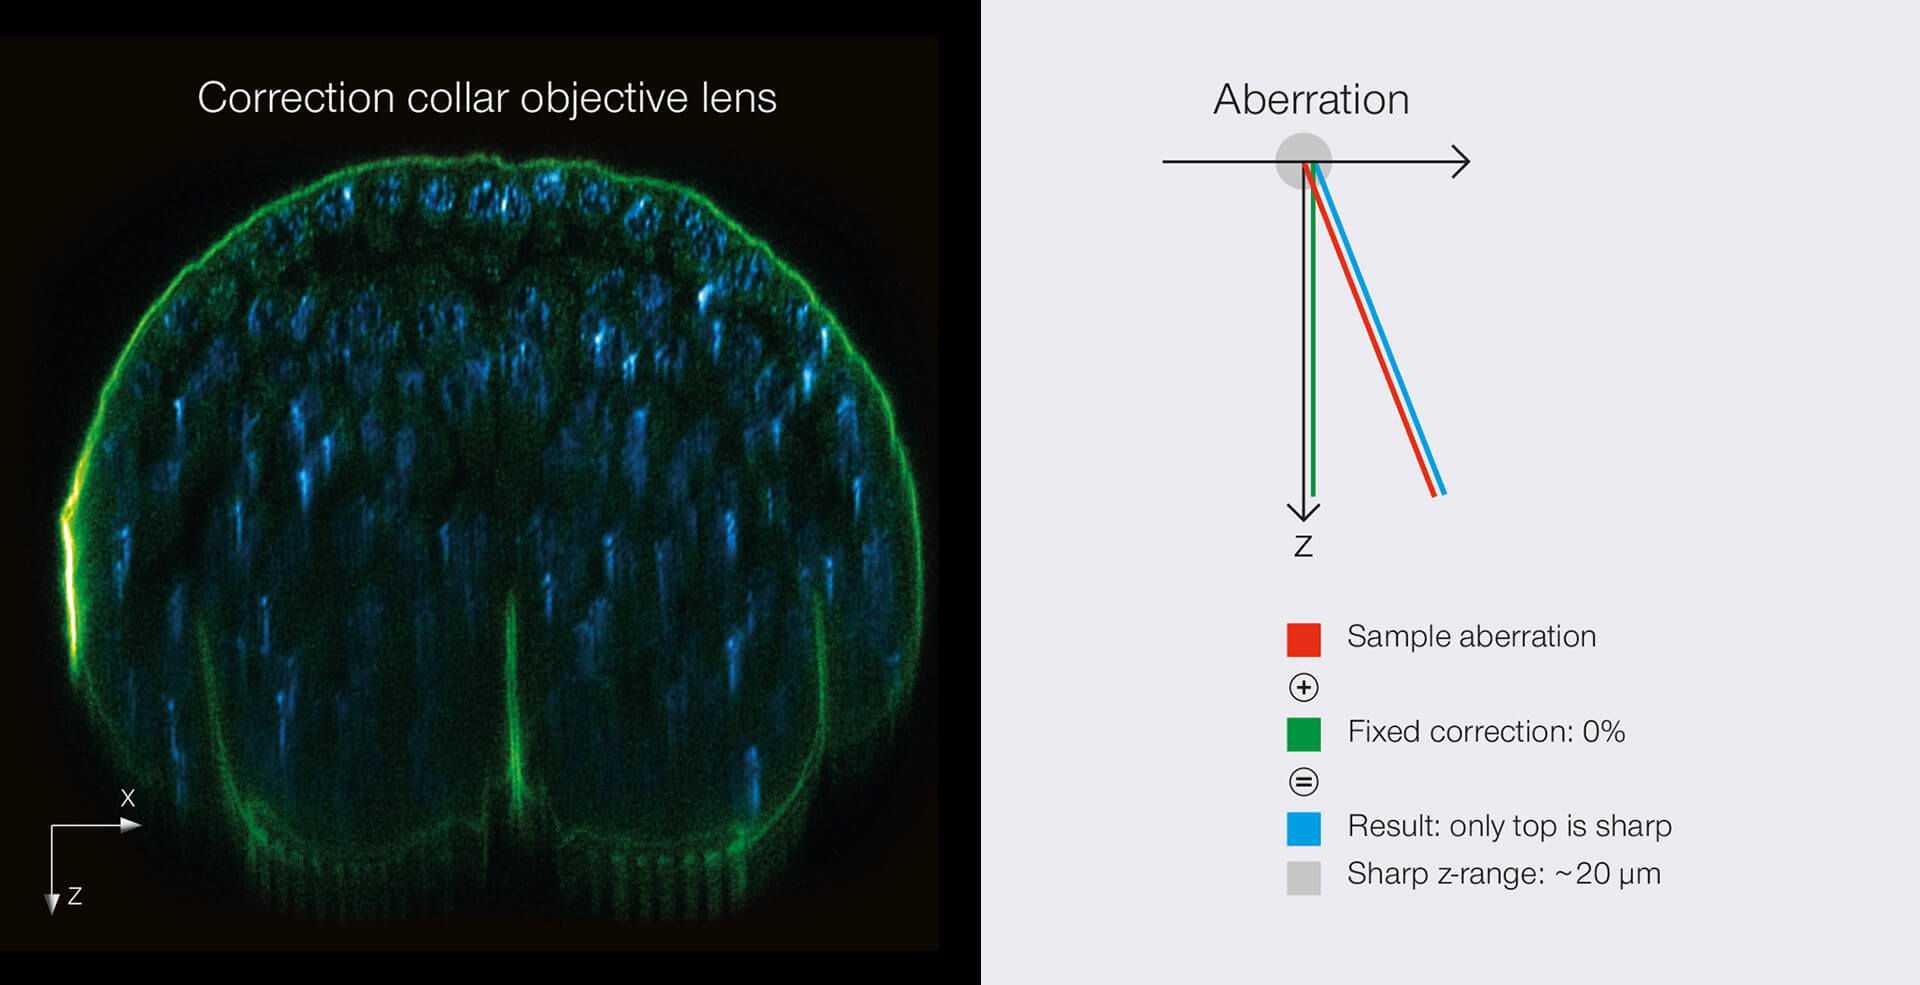 Comparison of RAYSHAPE deformable mirror vs correction collar objective lens. xz section of a stage 17 Drosophila embryo stained for chitin (abberior LIVE 610, green) and DNA (abberior LIVE 550, cyan). Position close to the cover slip.